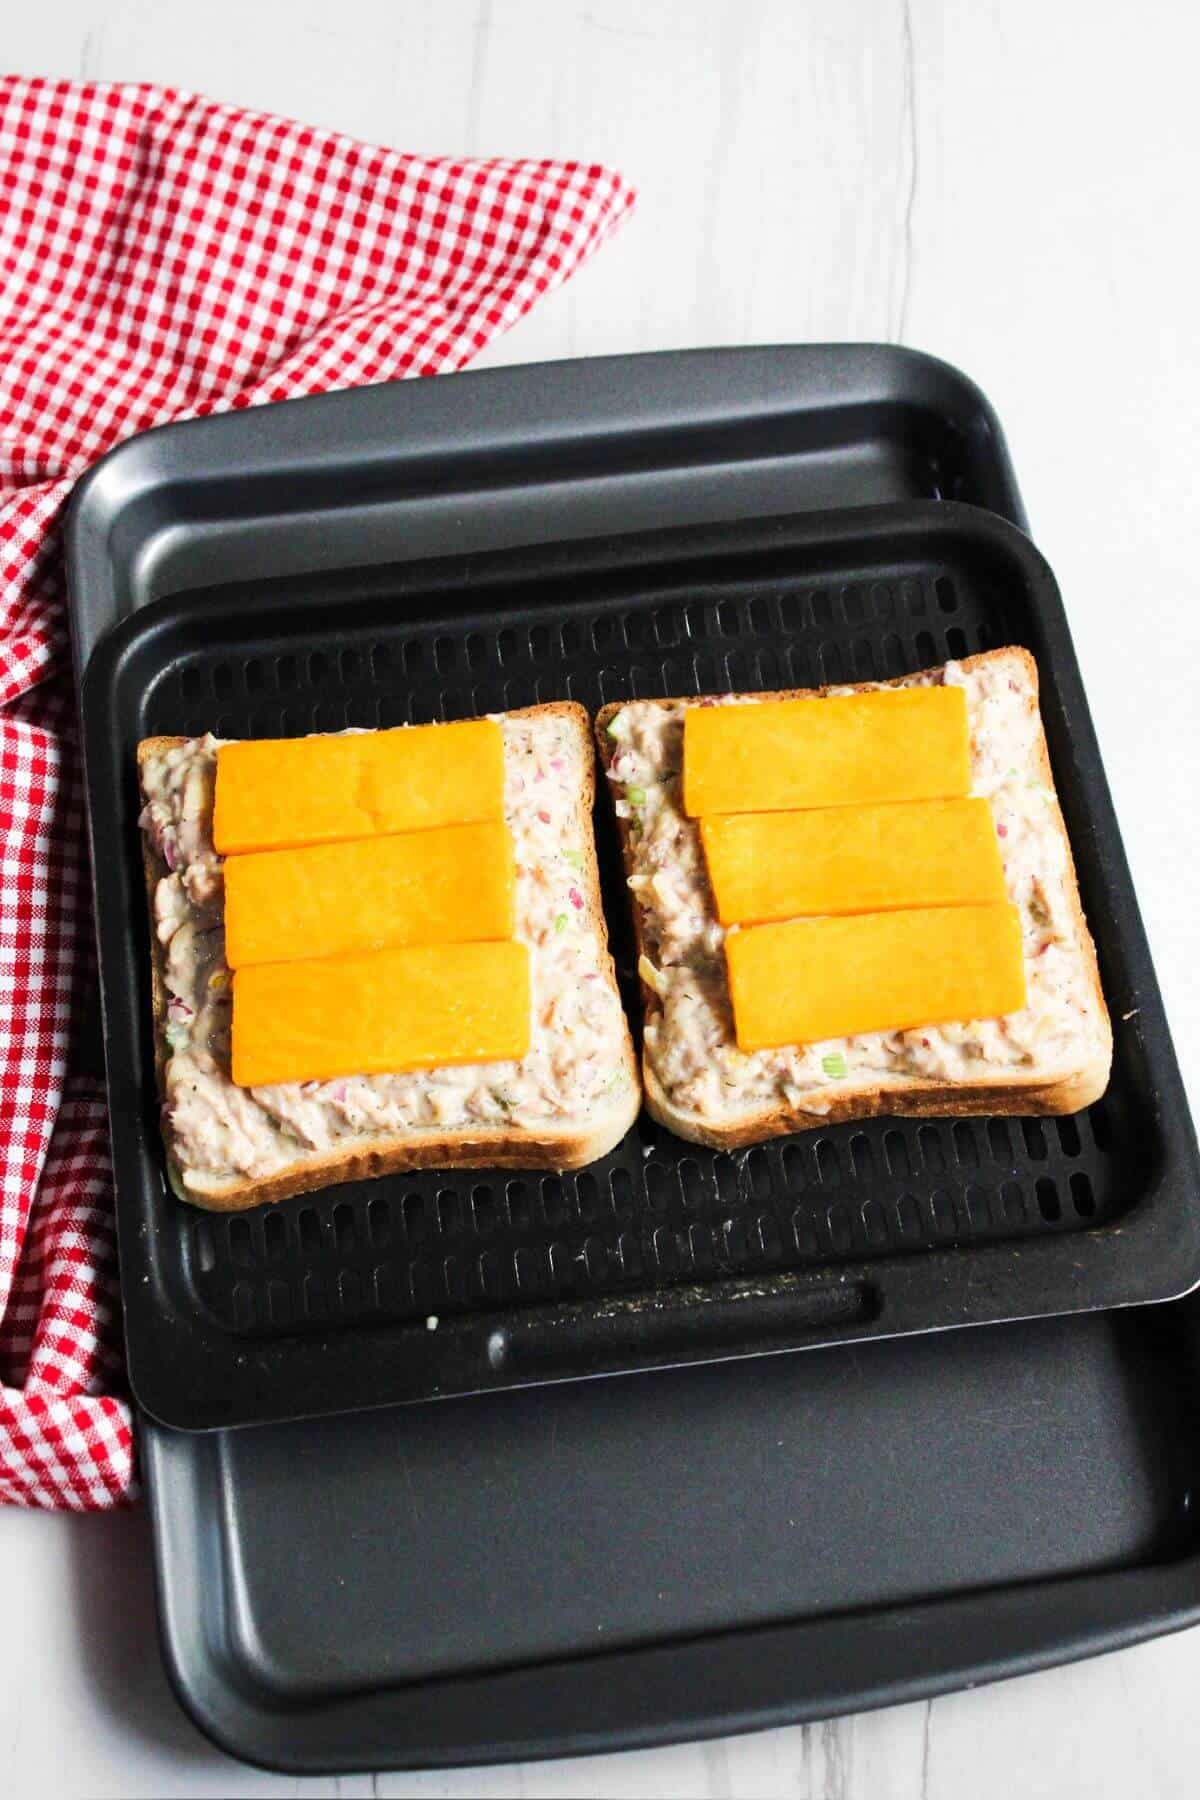 Two slices of bread topped with tuna and cheese on air fryer tray.